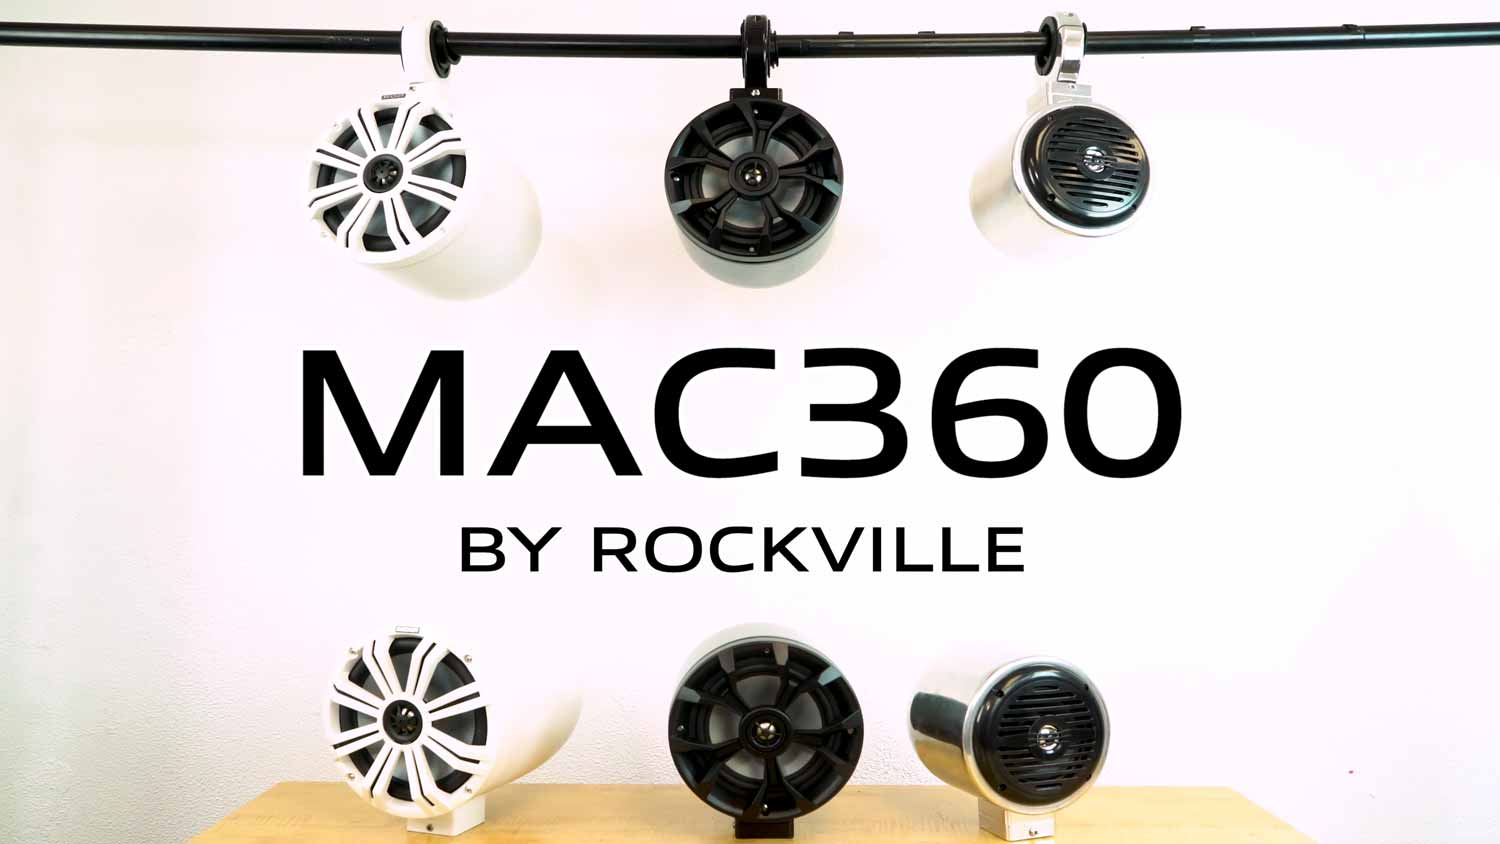 MAC360C 360° Degree Swivel Tower/Surface Mount Clamps 4 Rockville Wakeboards Details about    2 